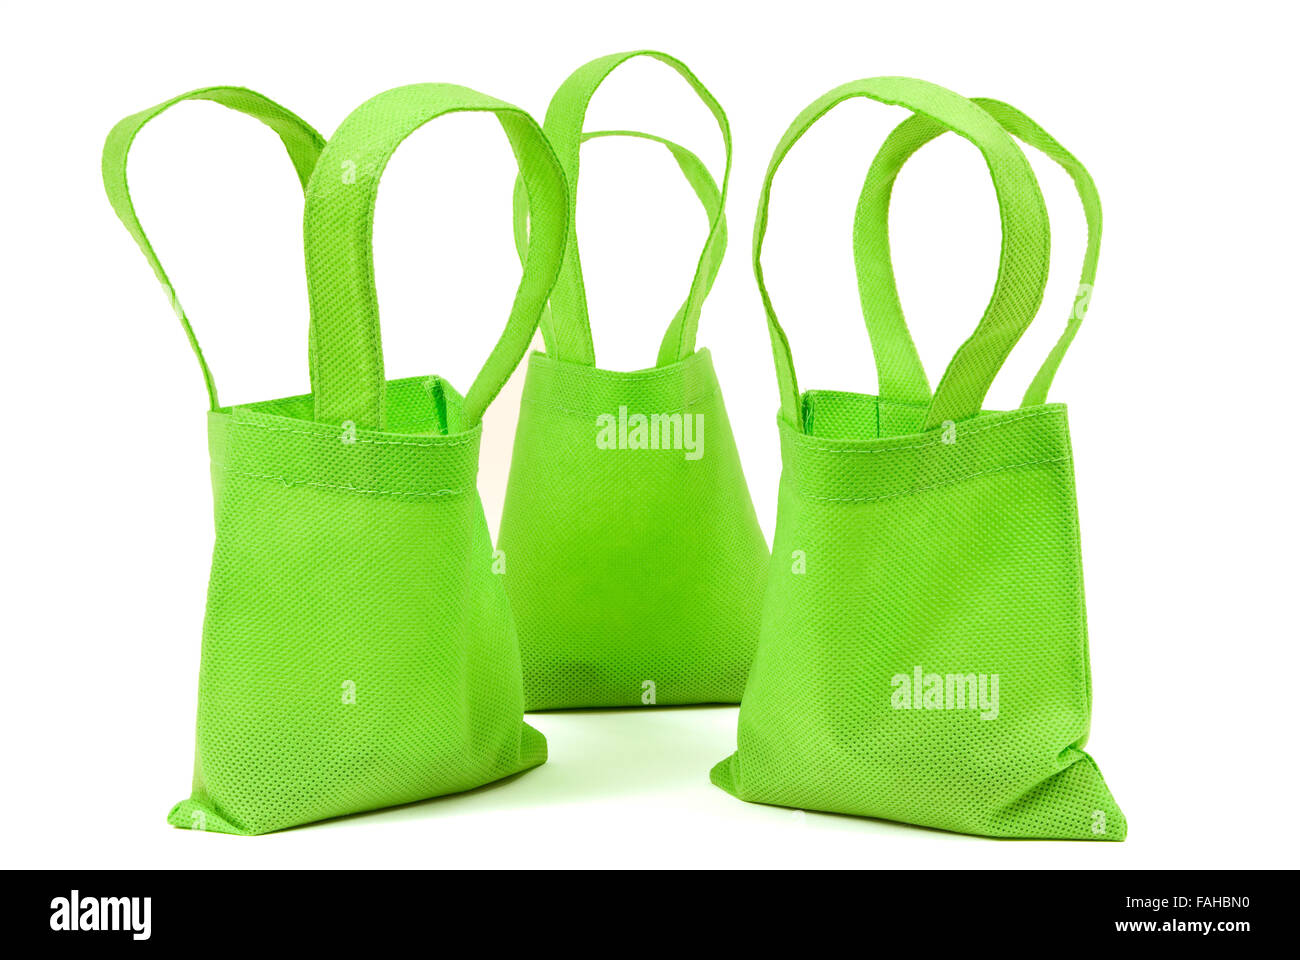 Green Neon Cloth Bags With Shadows Stock Photo